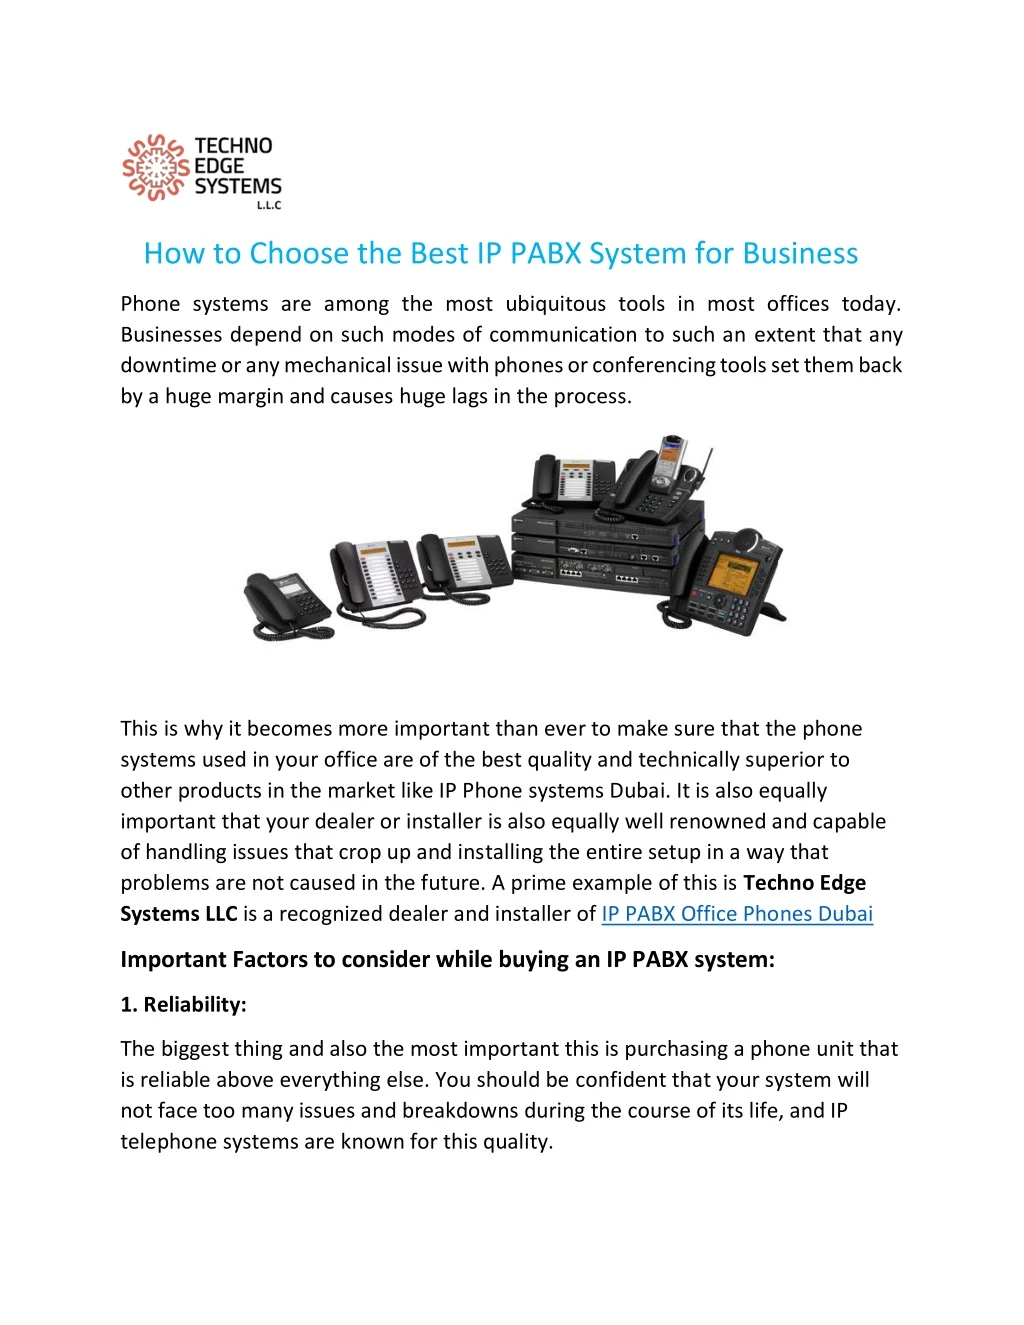 how to choose the best ip pabx system for business